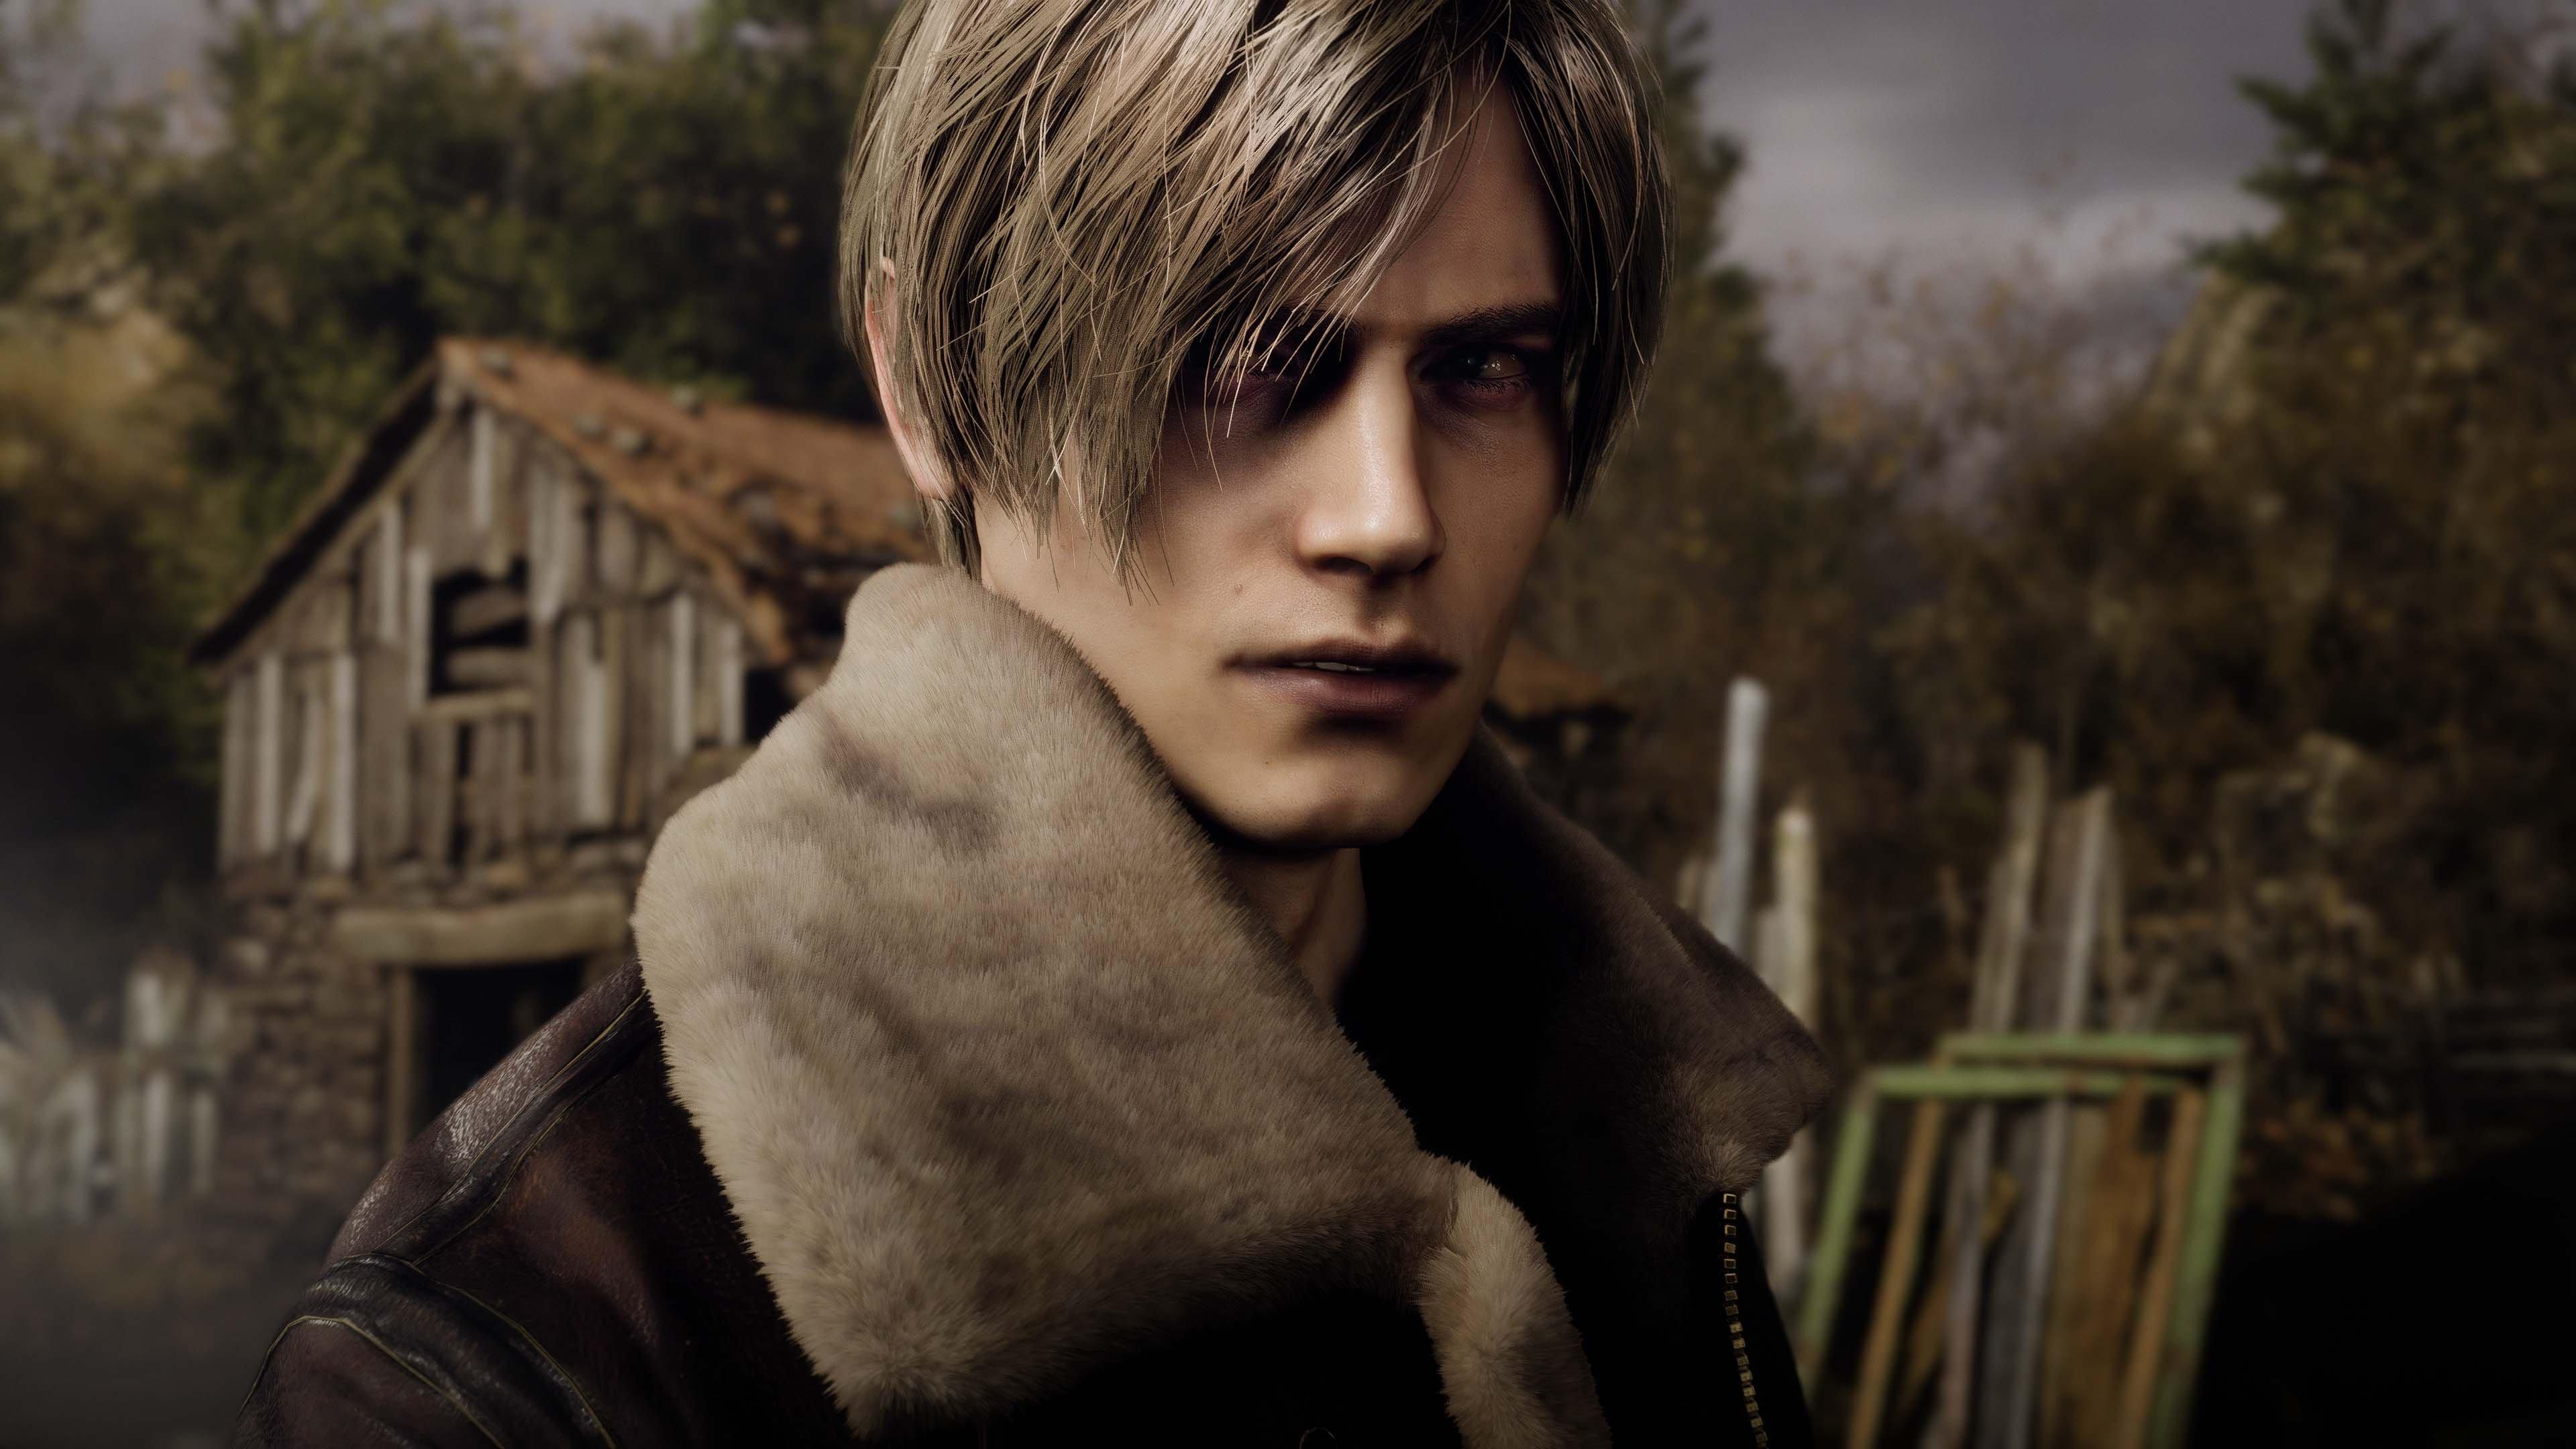 Buy Resident Evil 4 Deluxe Edition